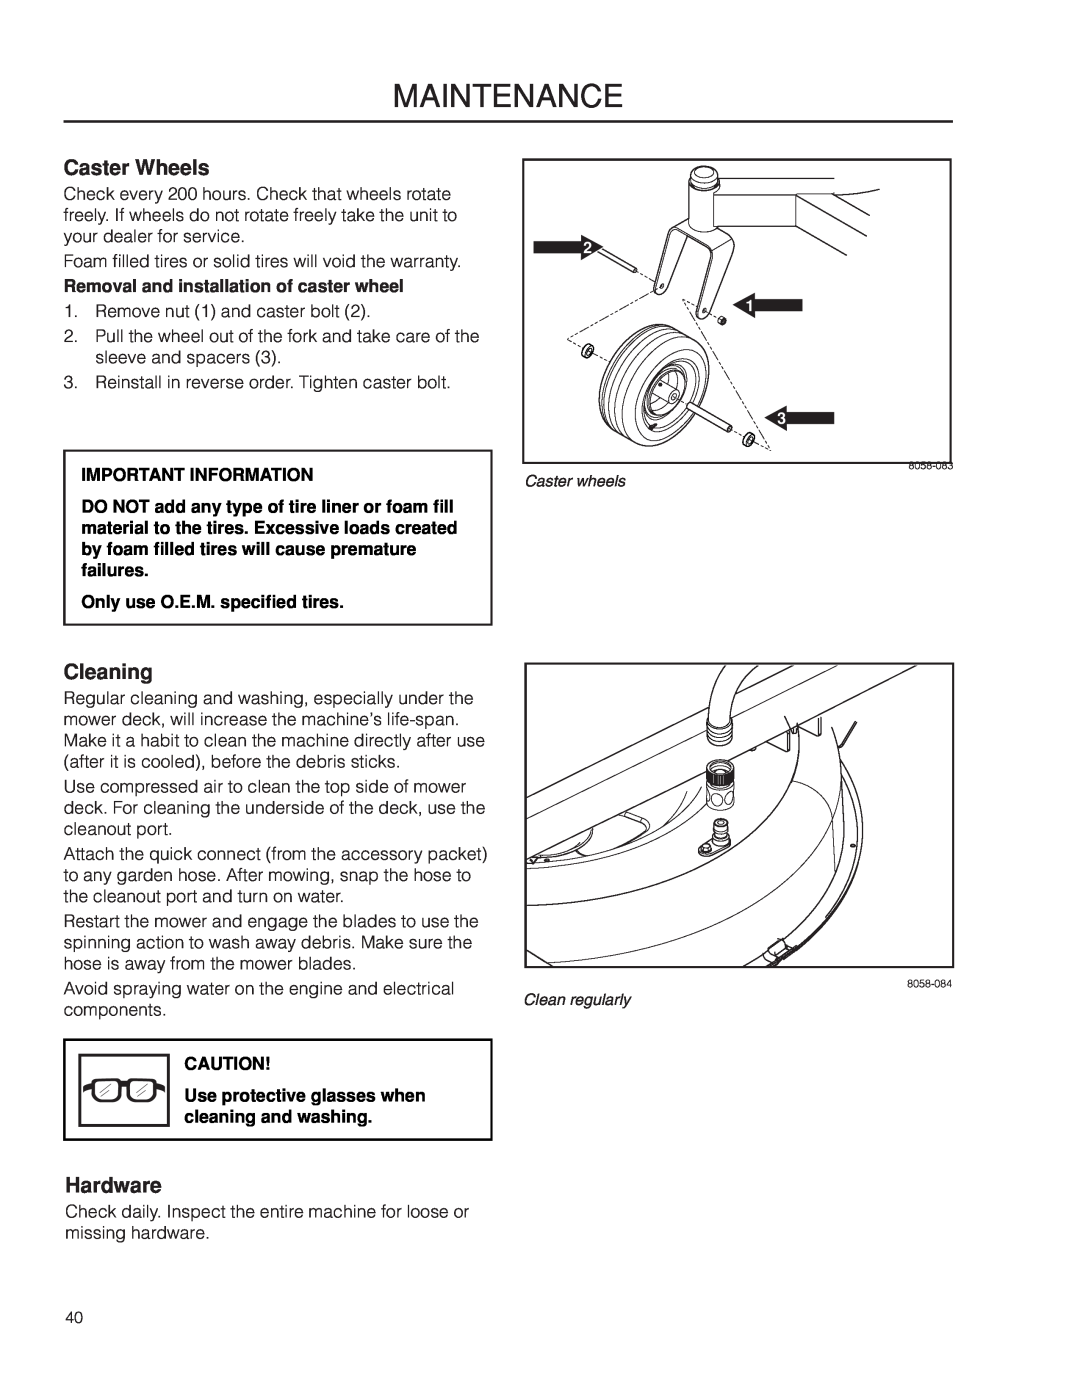 Husqvarna 966582201, 966809001 Caster Wheels, Cleaning, Hardware, Removal and installation of caster wheel, Maintenance 